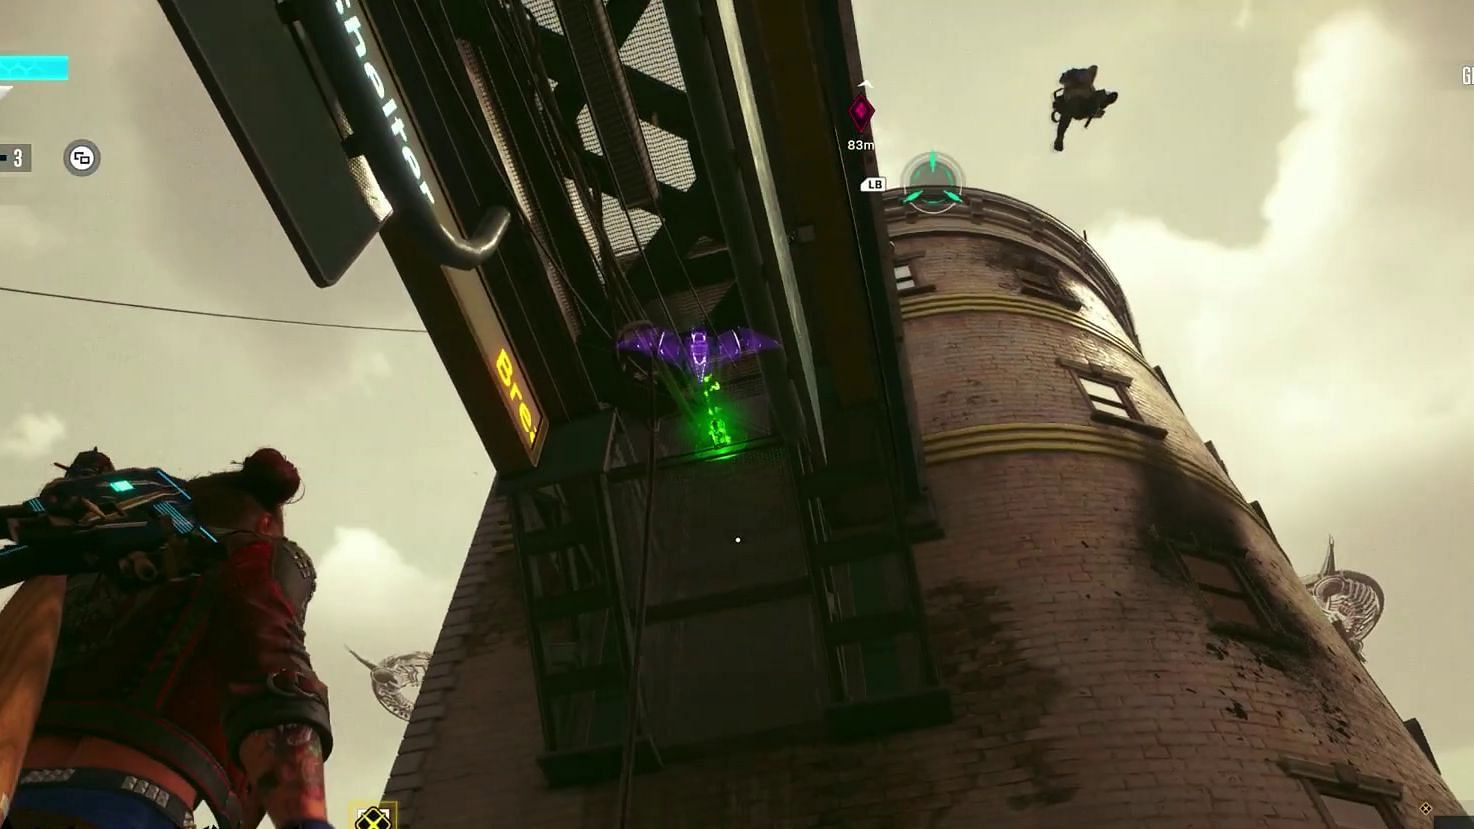 The trophy can be spotted between the metal support beams, as shown here (Image via YouTube/Pixelz)